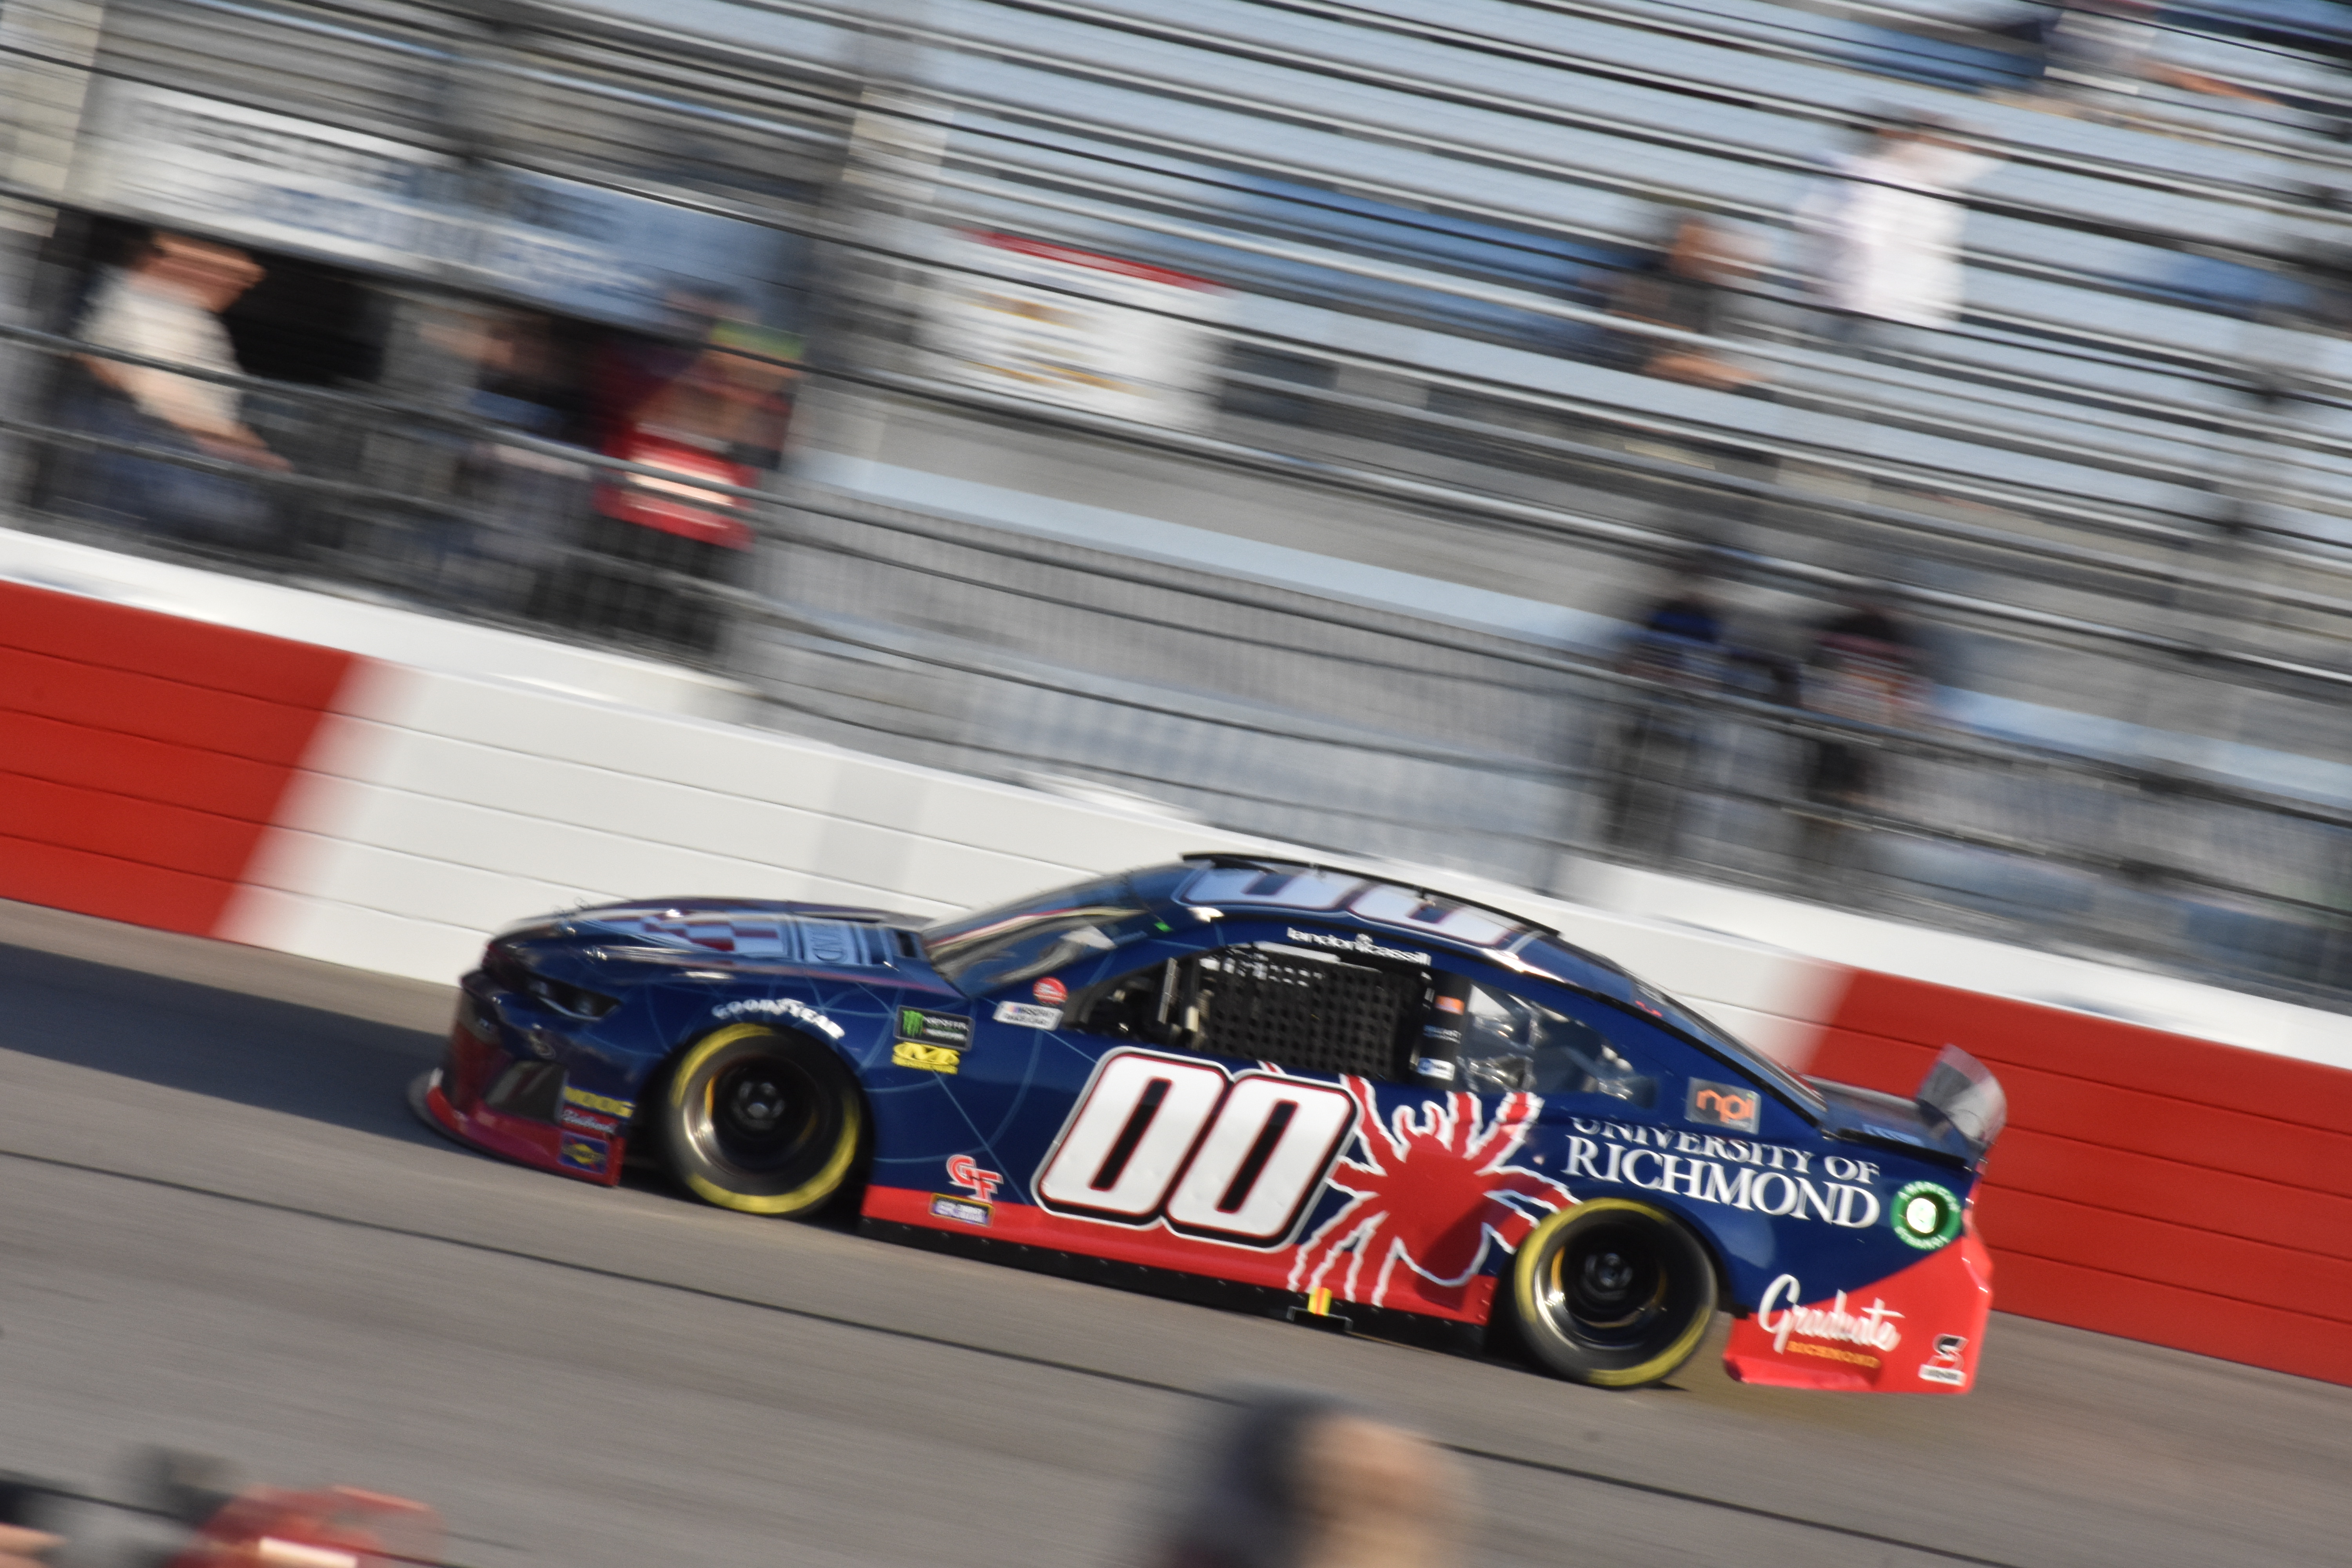 Whether in Cup or NXS, Cassill thrives in his current rides. (Photo Credit: Andrew Fuller/TPF)